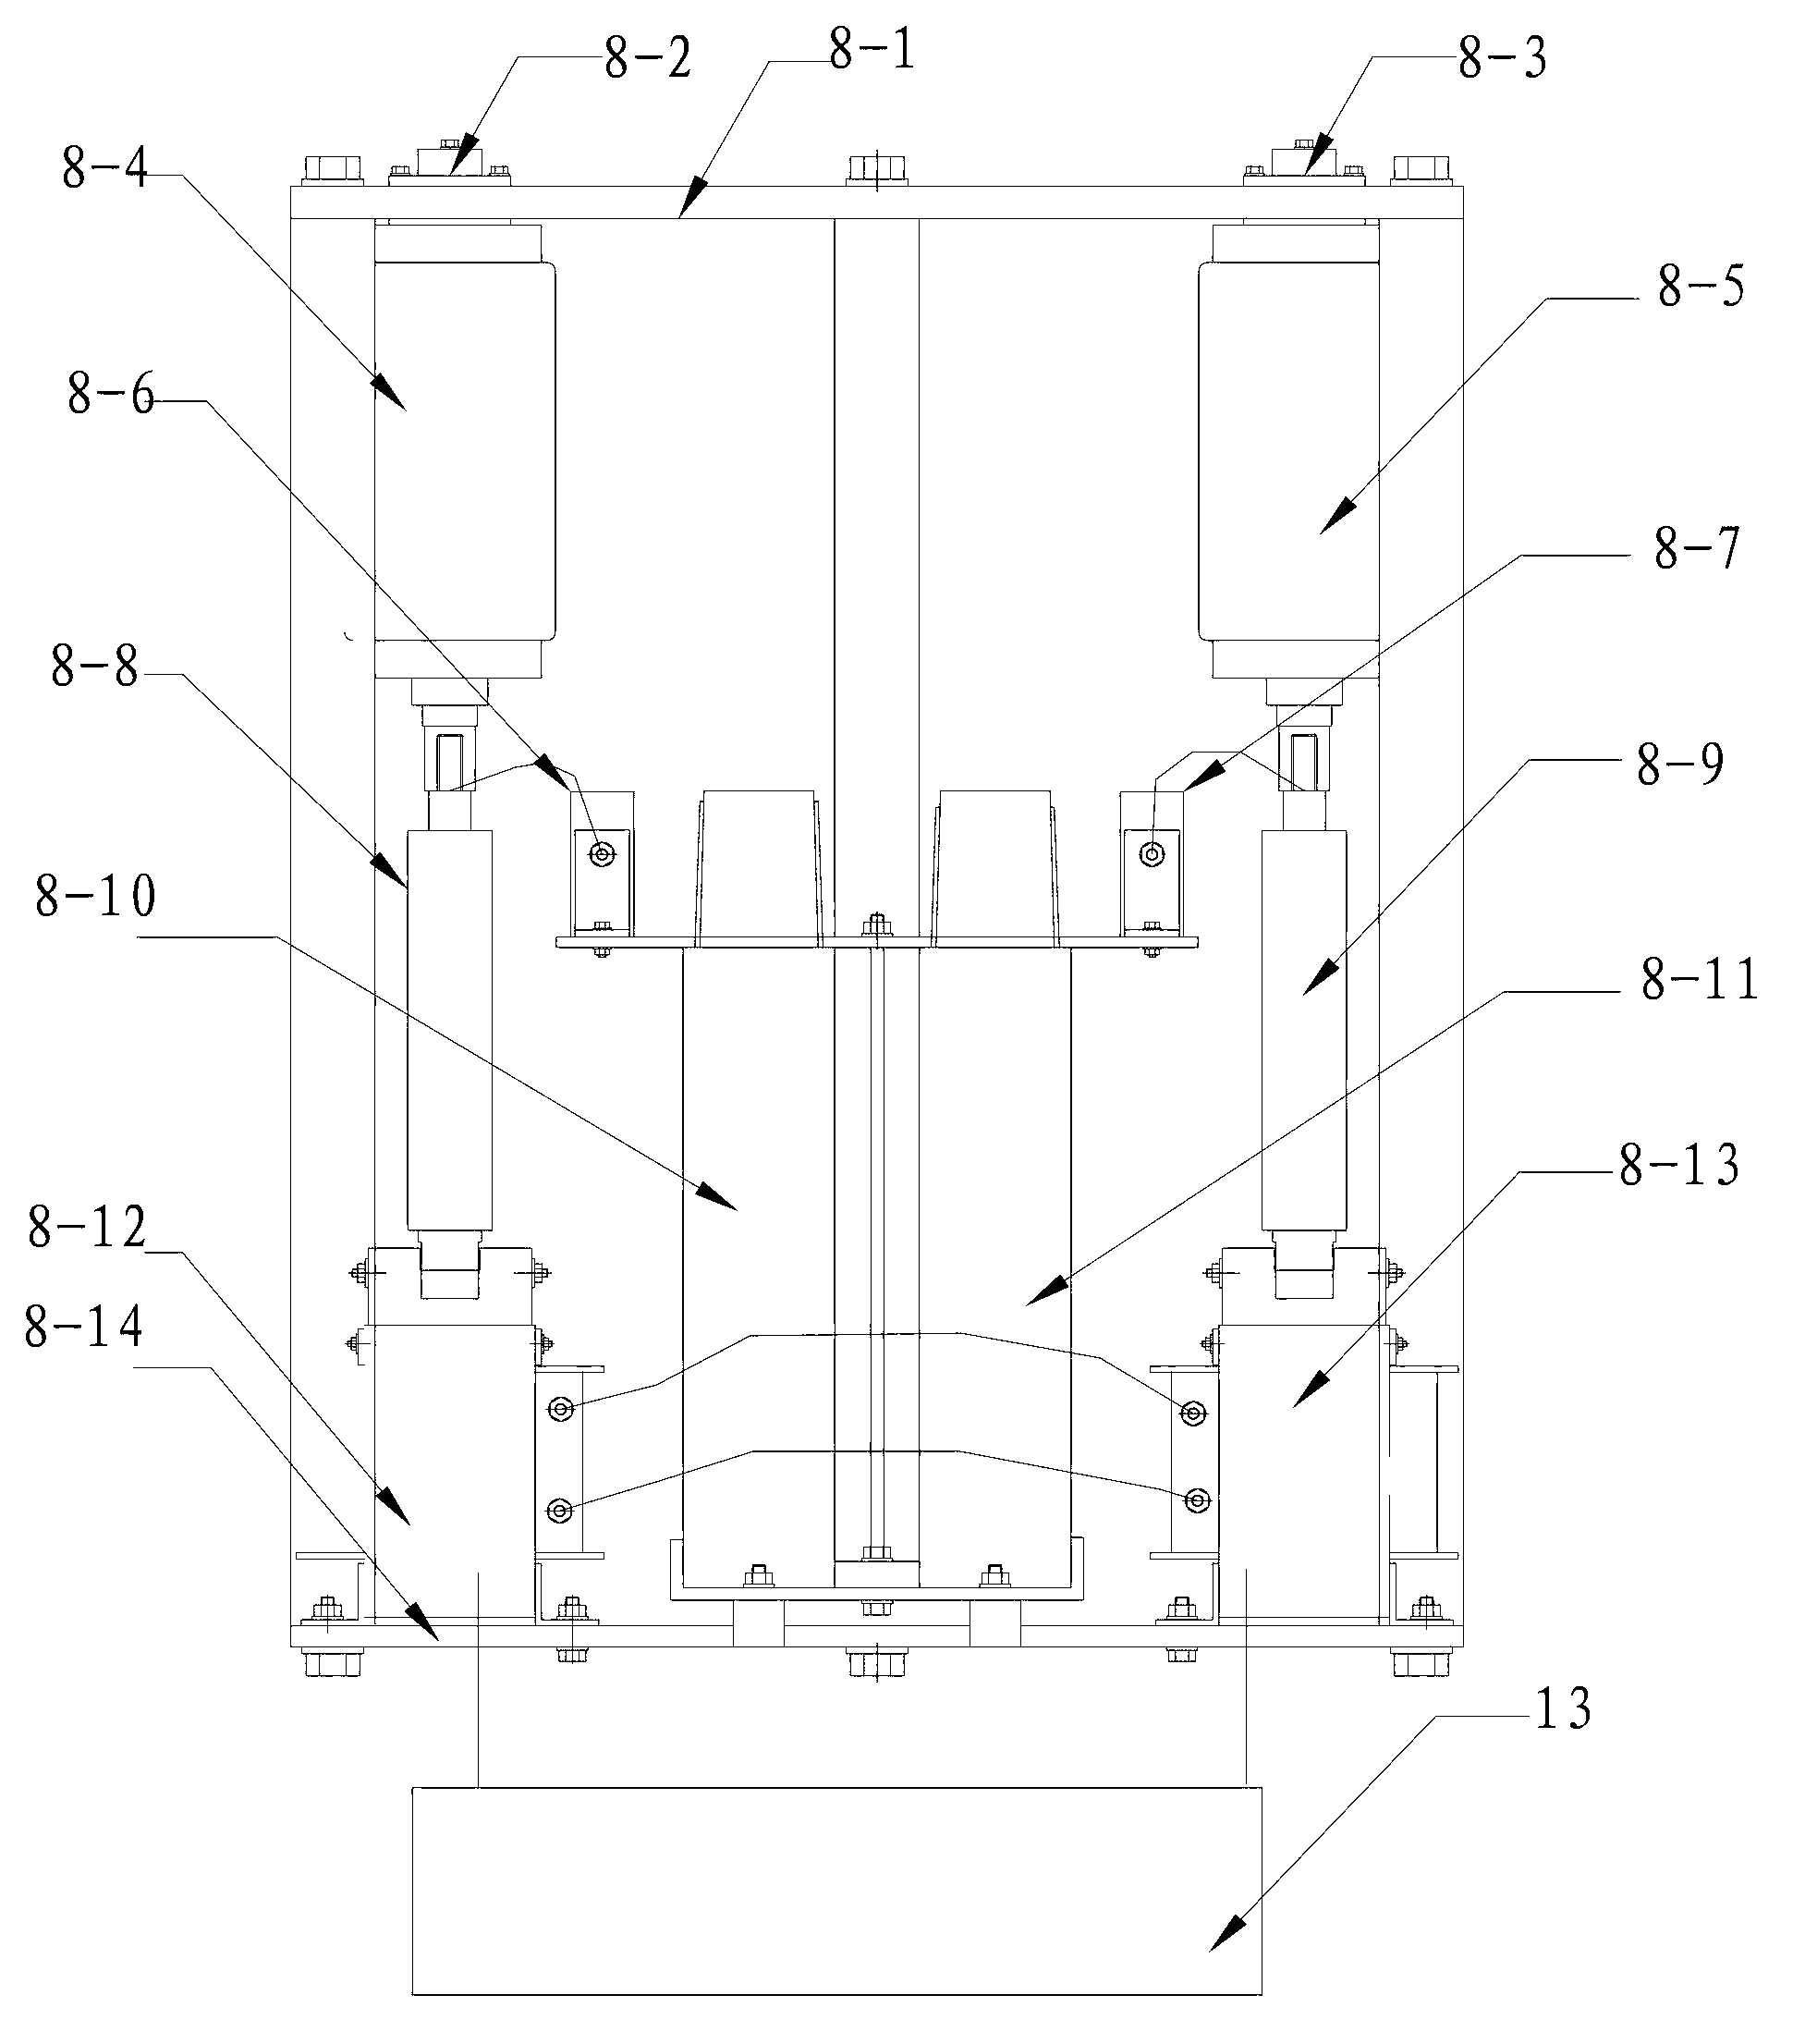 Crude oil electric dehydration high voltage power supply device